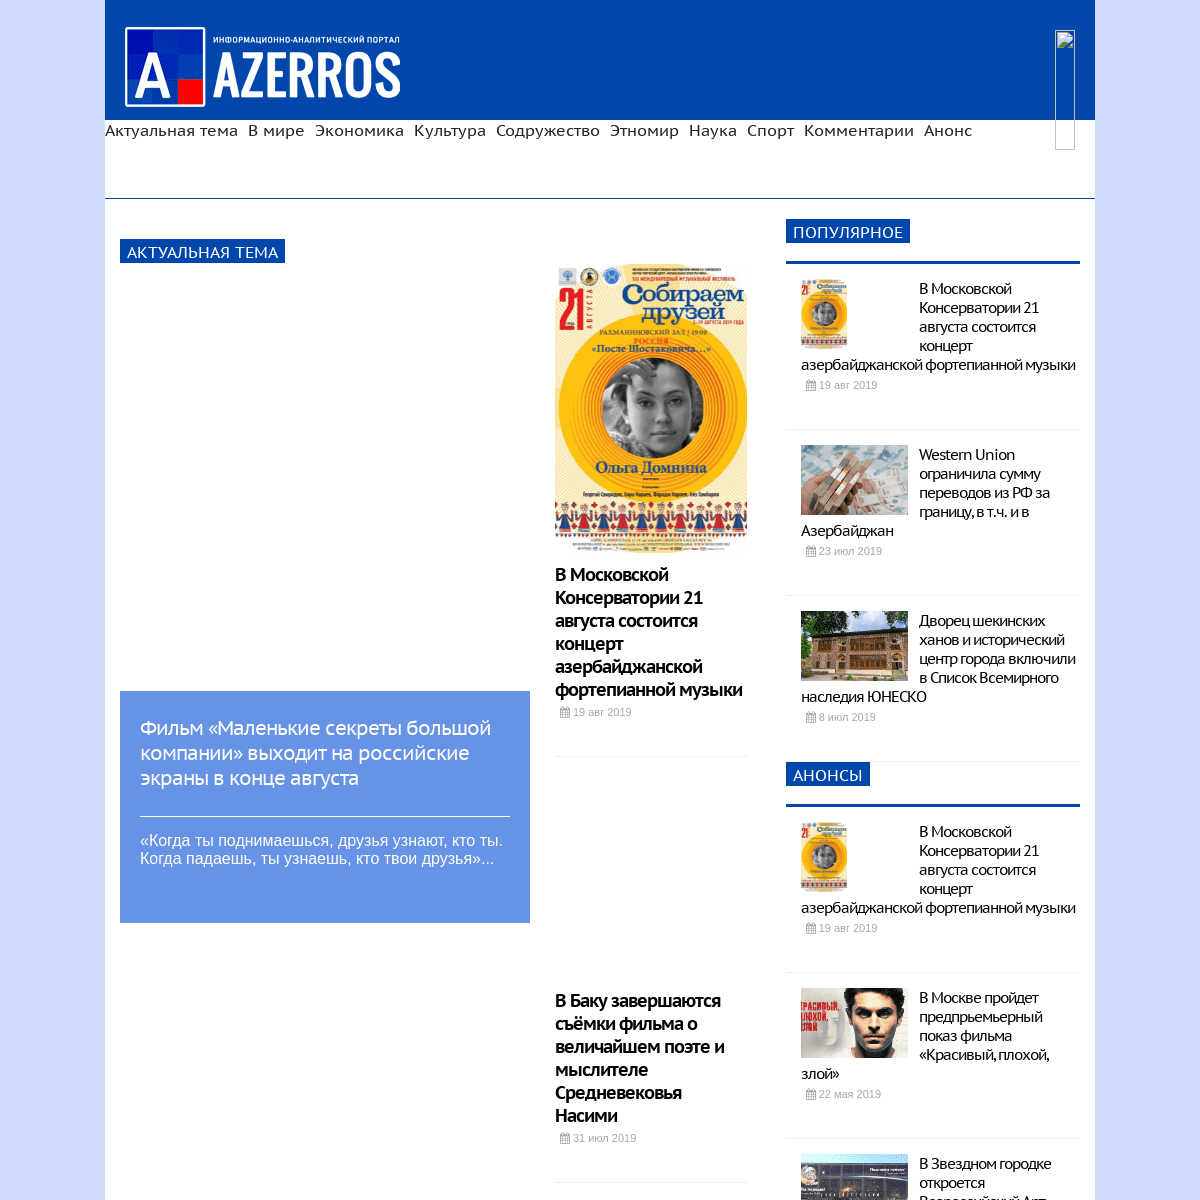 A complete backup of https://azerros.ru